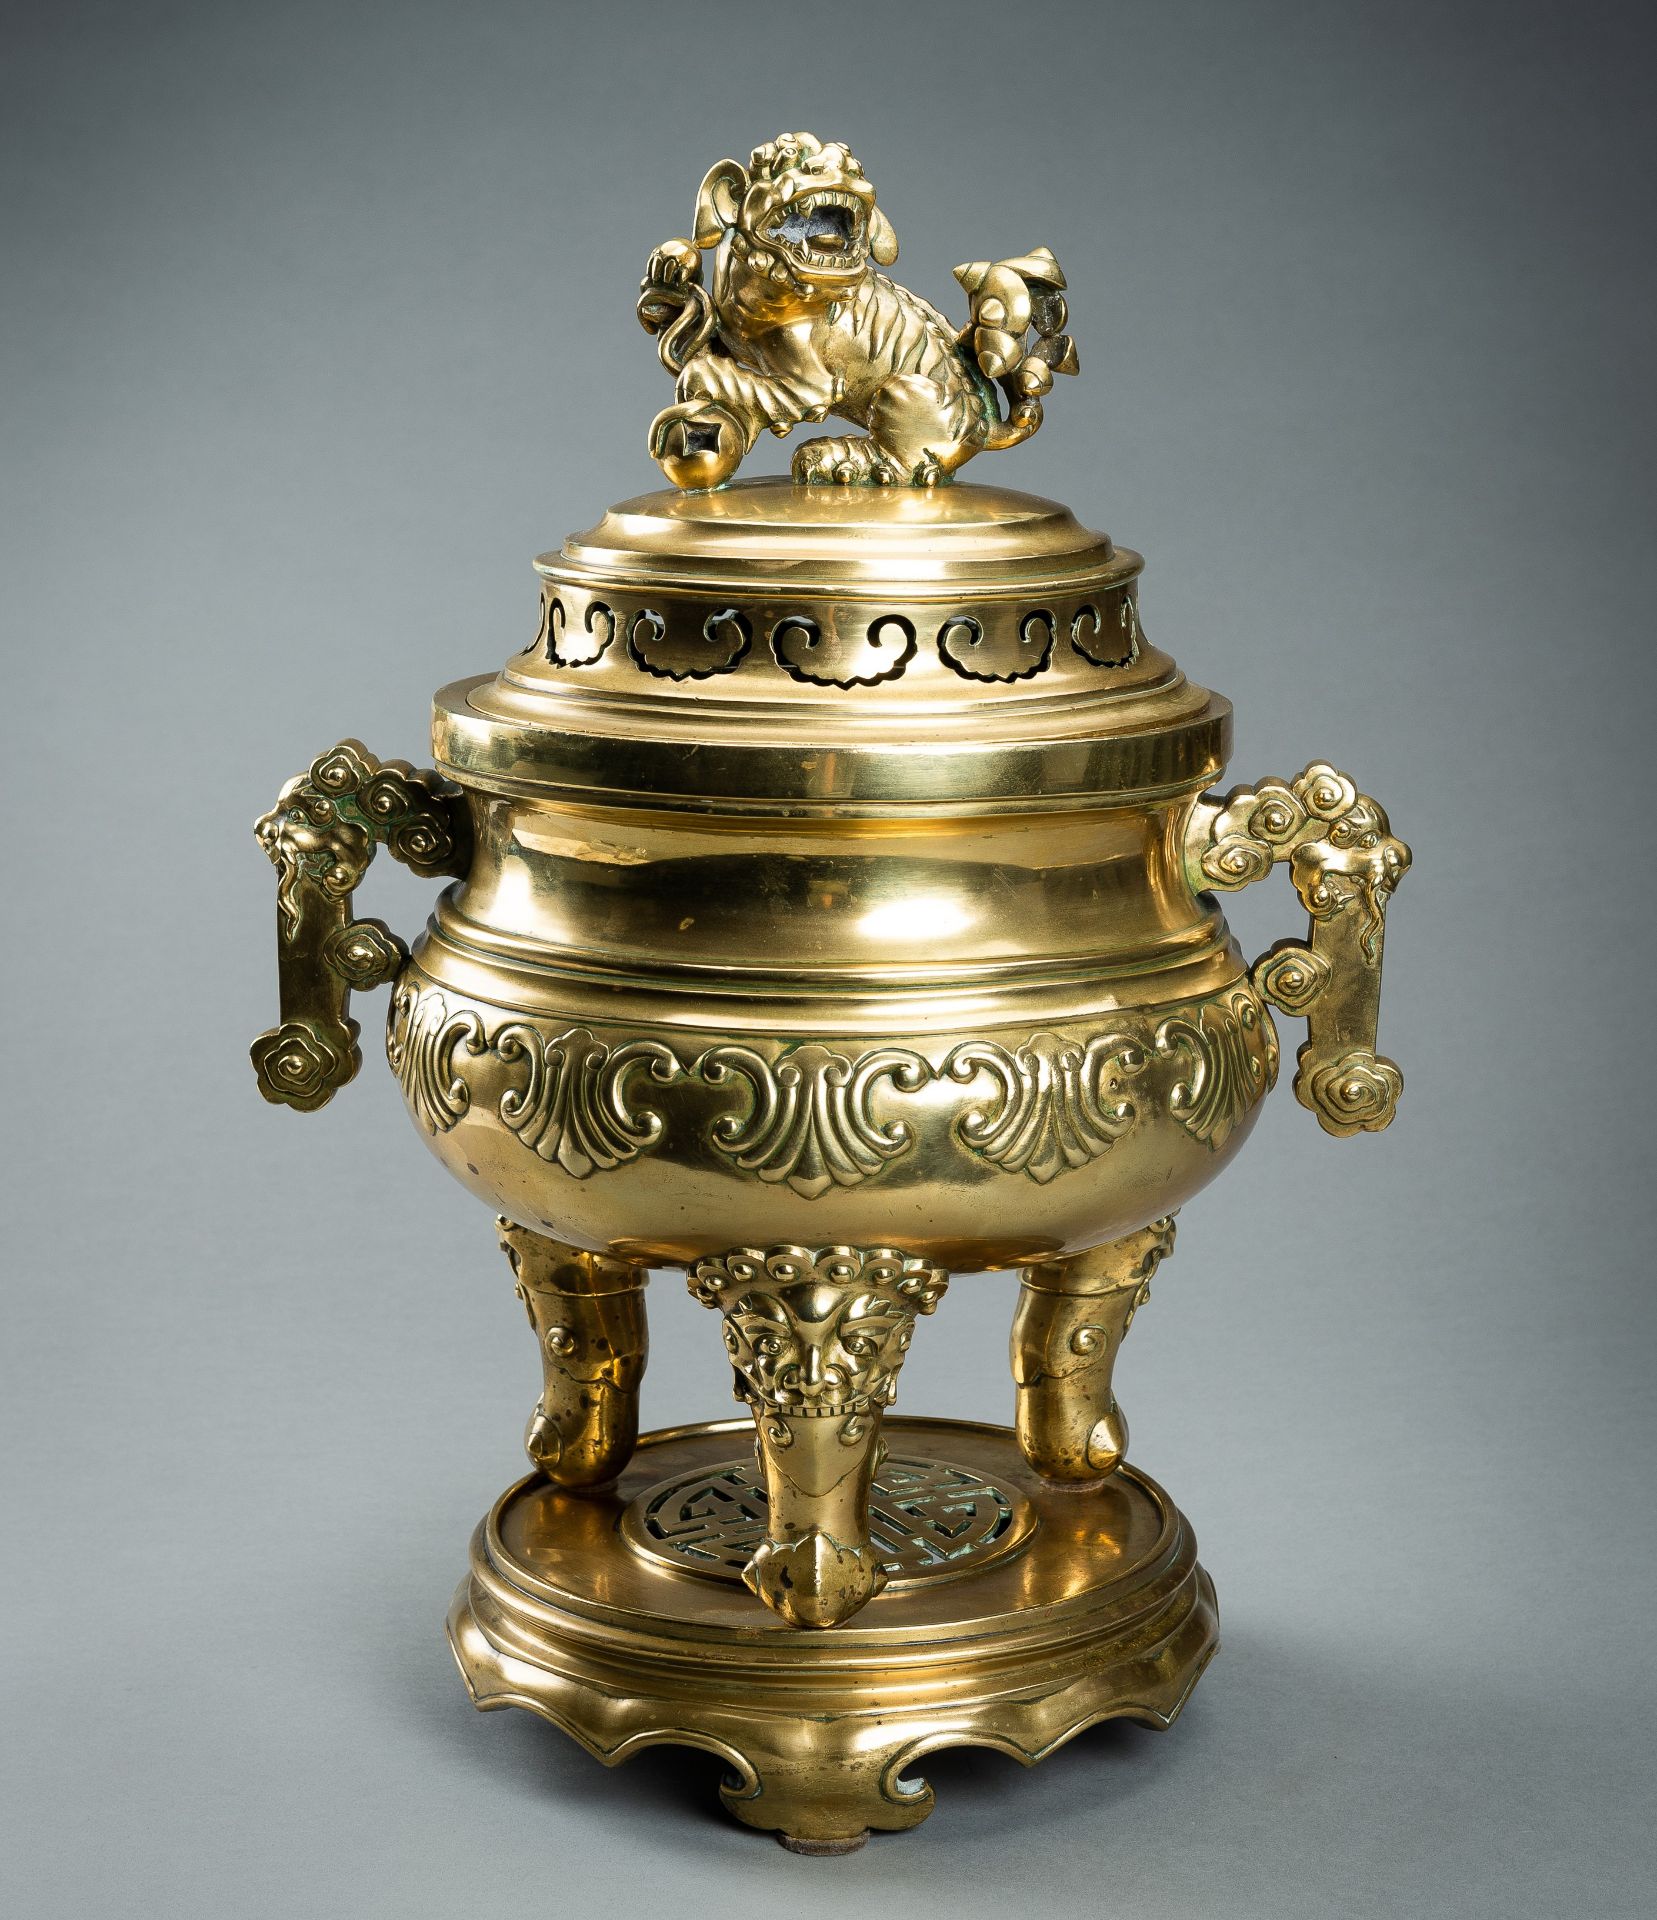 A MASSIVE GILT BRONZE TRIPOD CENSER WITH STAND AND COVER, QING